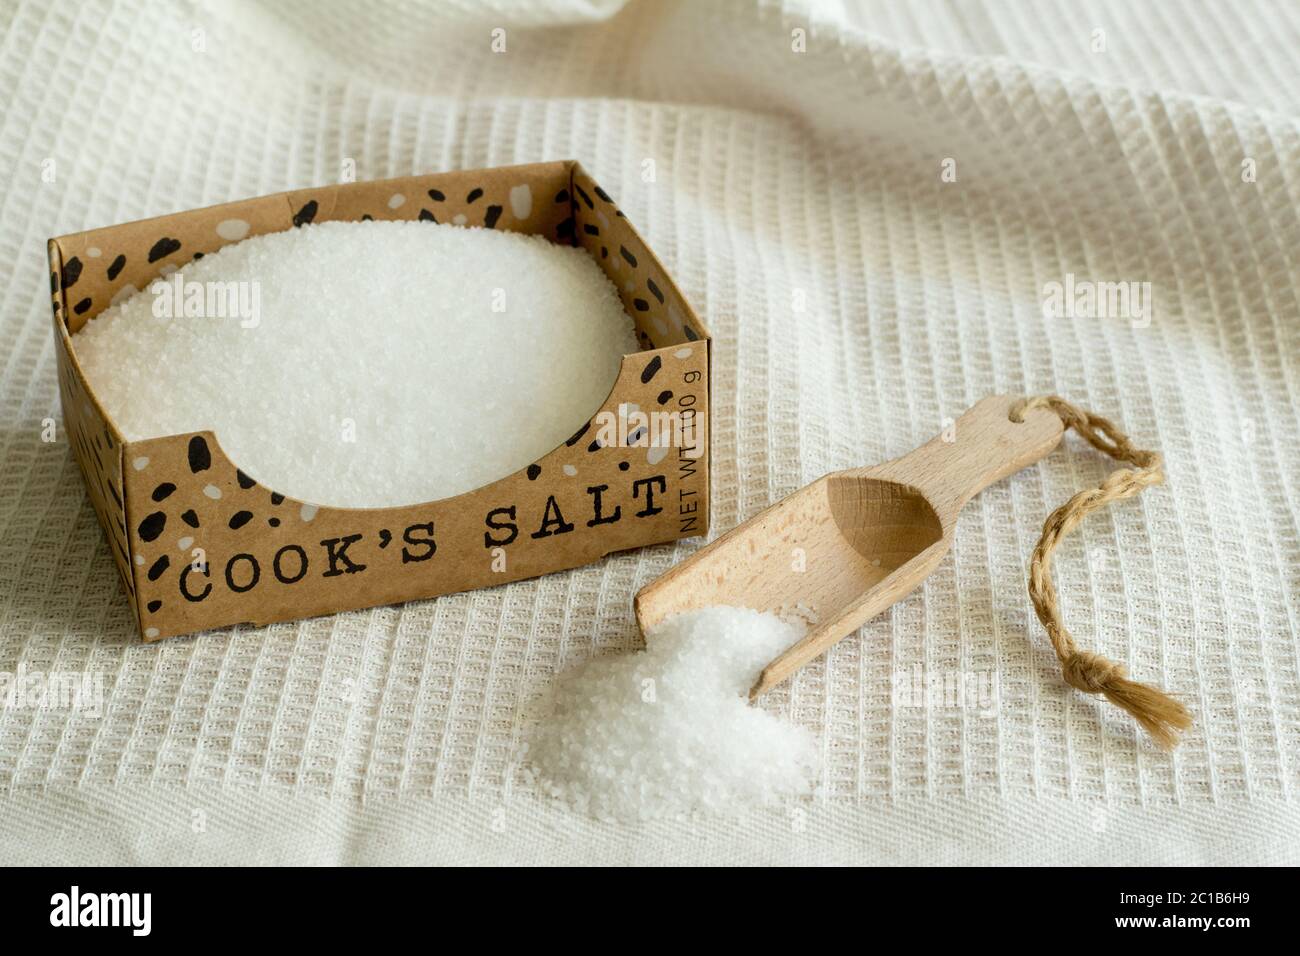 Chef's salt on white kitchen cloth with spoon Stock Photo